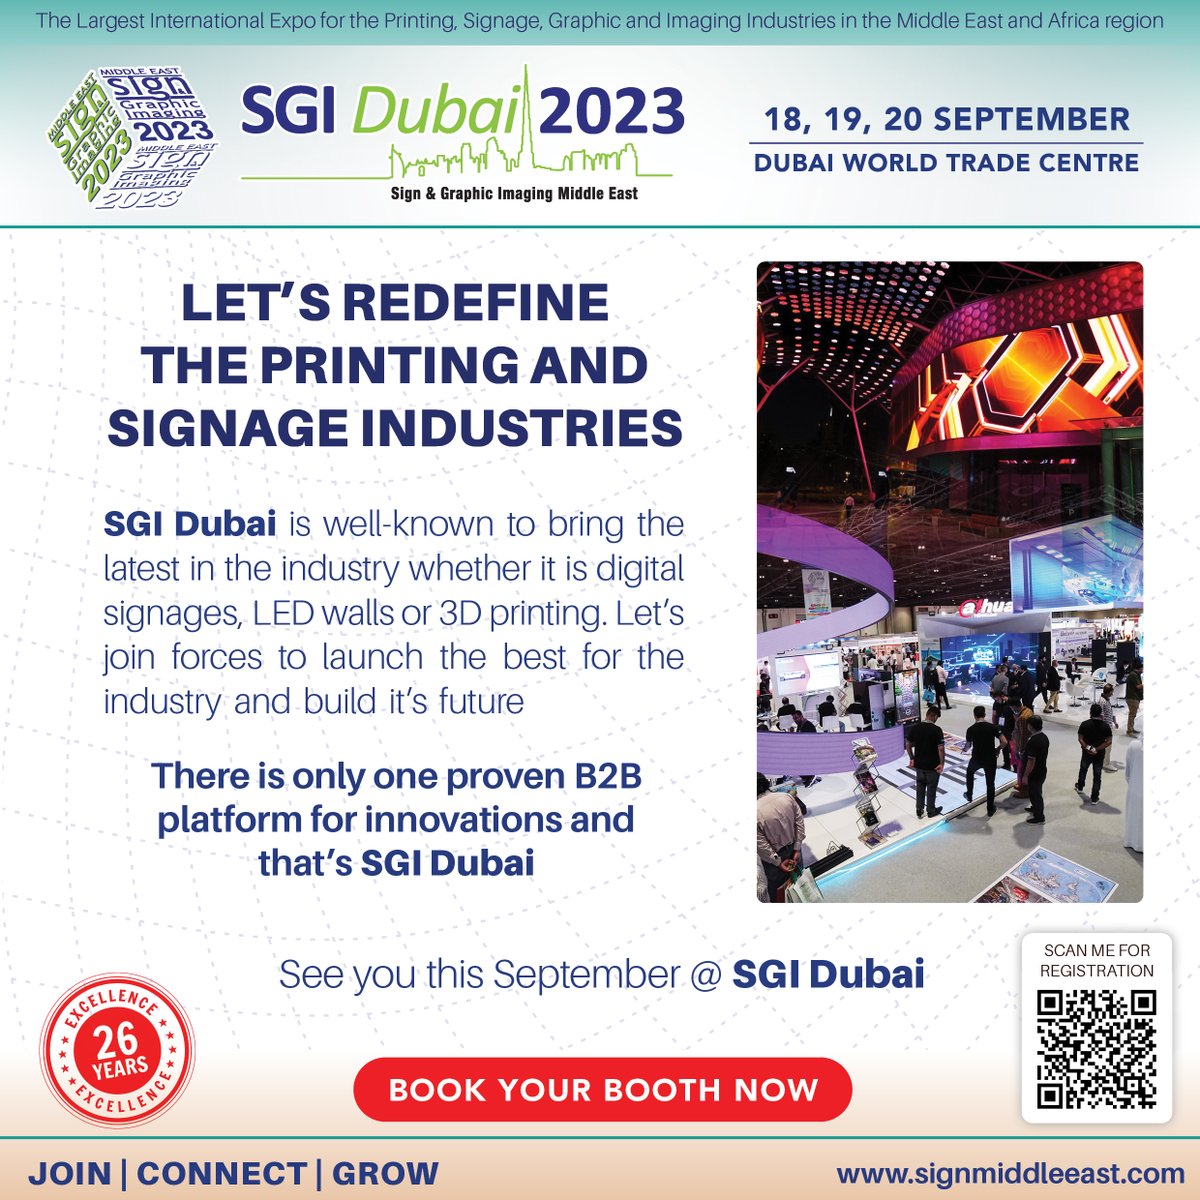 SGI Dubai 2023 - Redefining the Printing and Signage Industries
Book your booth: bit.ly/412CTI0

#printing #signage #SGIDubai #digitalsignage #LED #textileprinting #largeformatprinting #3dprinting #gifts #digitaldisplay #promotion #labeling #labelingmachine